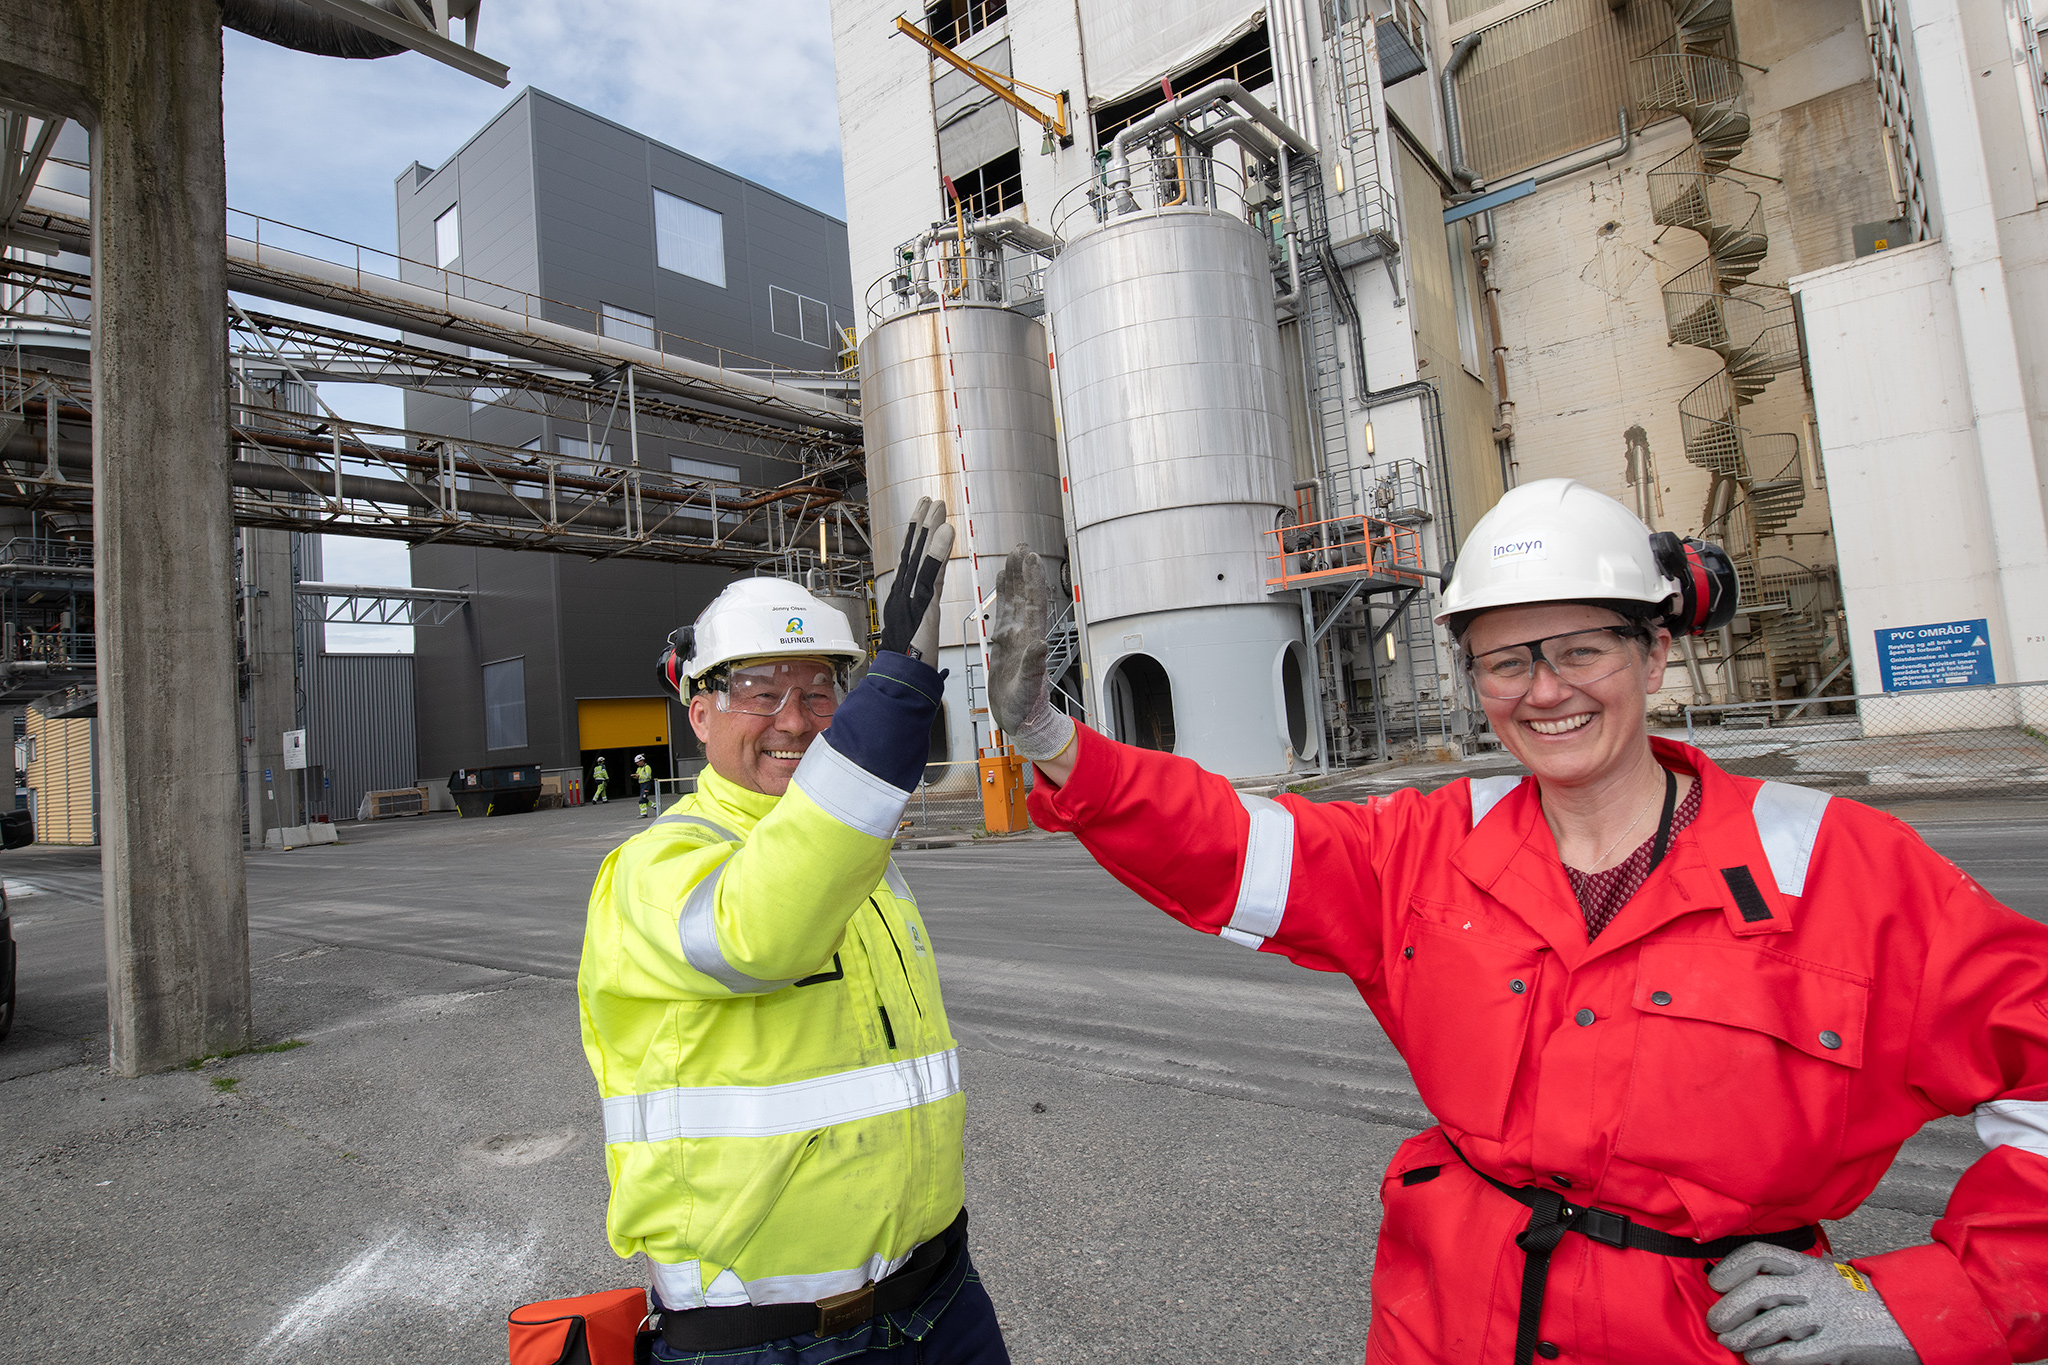 Woman dressed in red working clothes, man with yellow jacket, industrial area, high five.